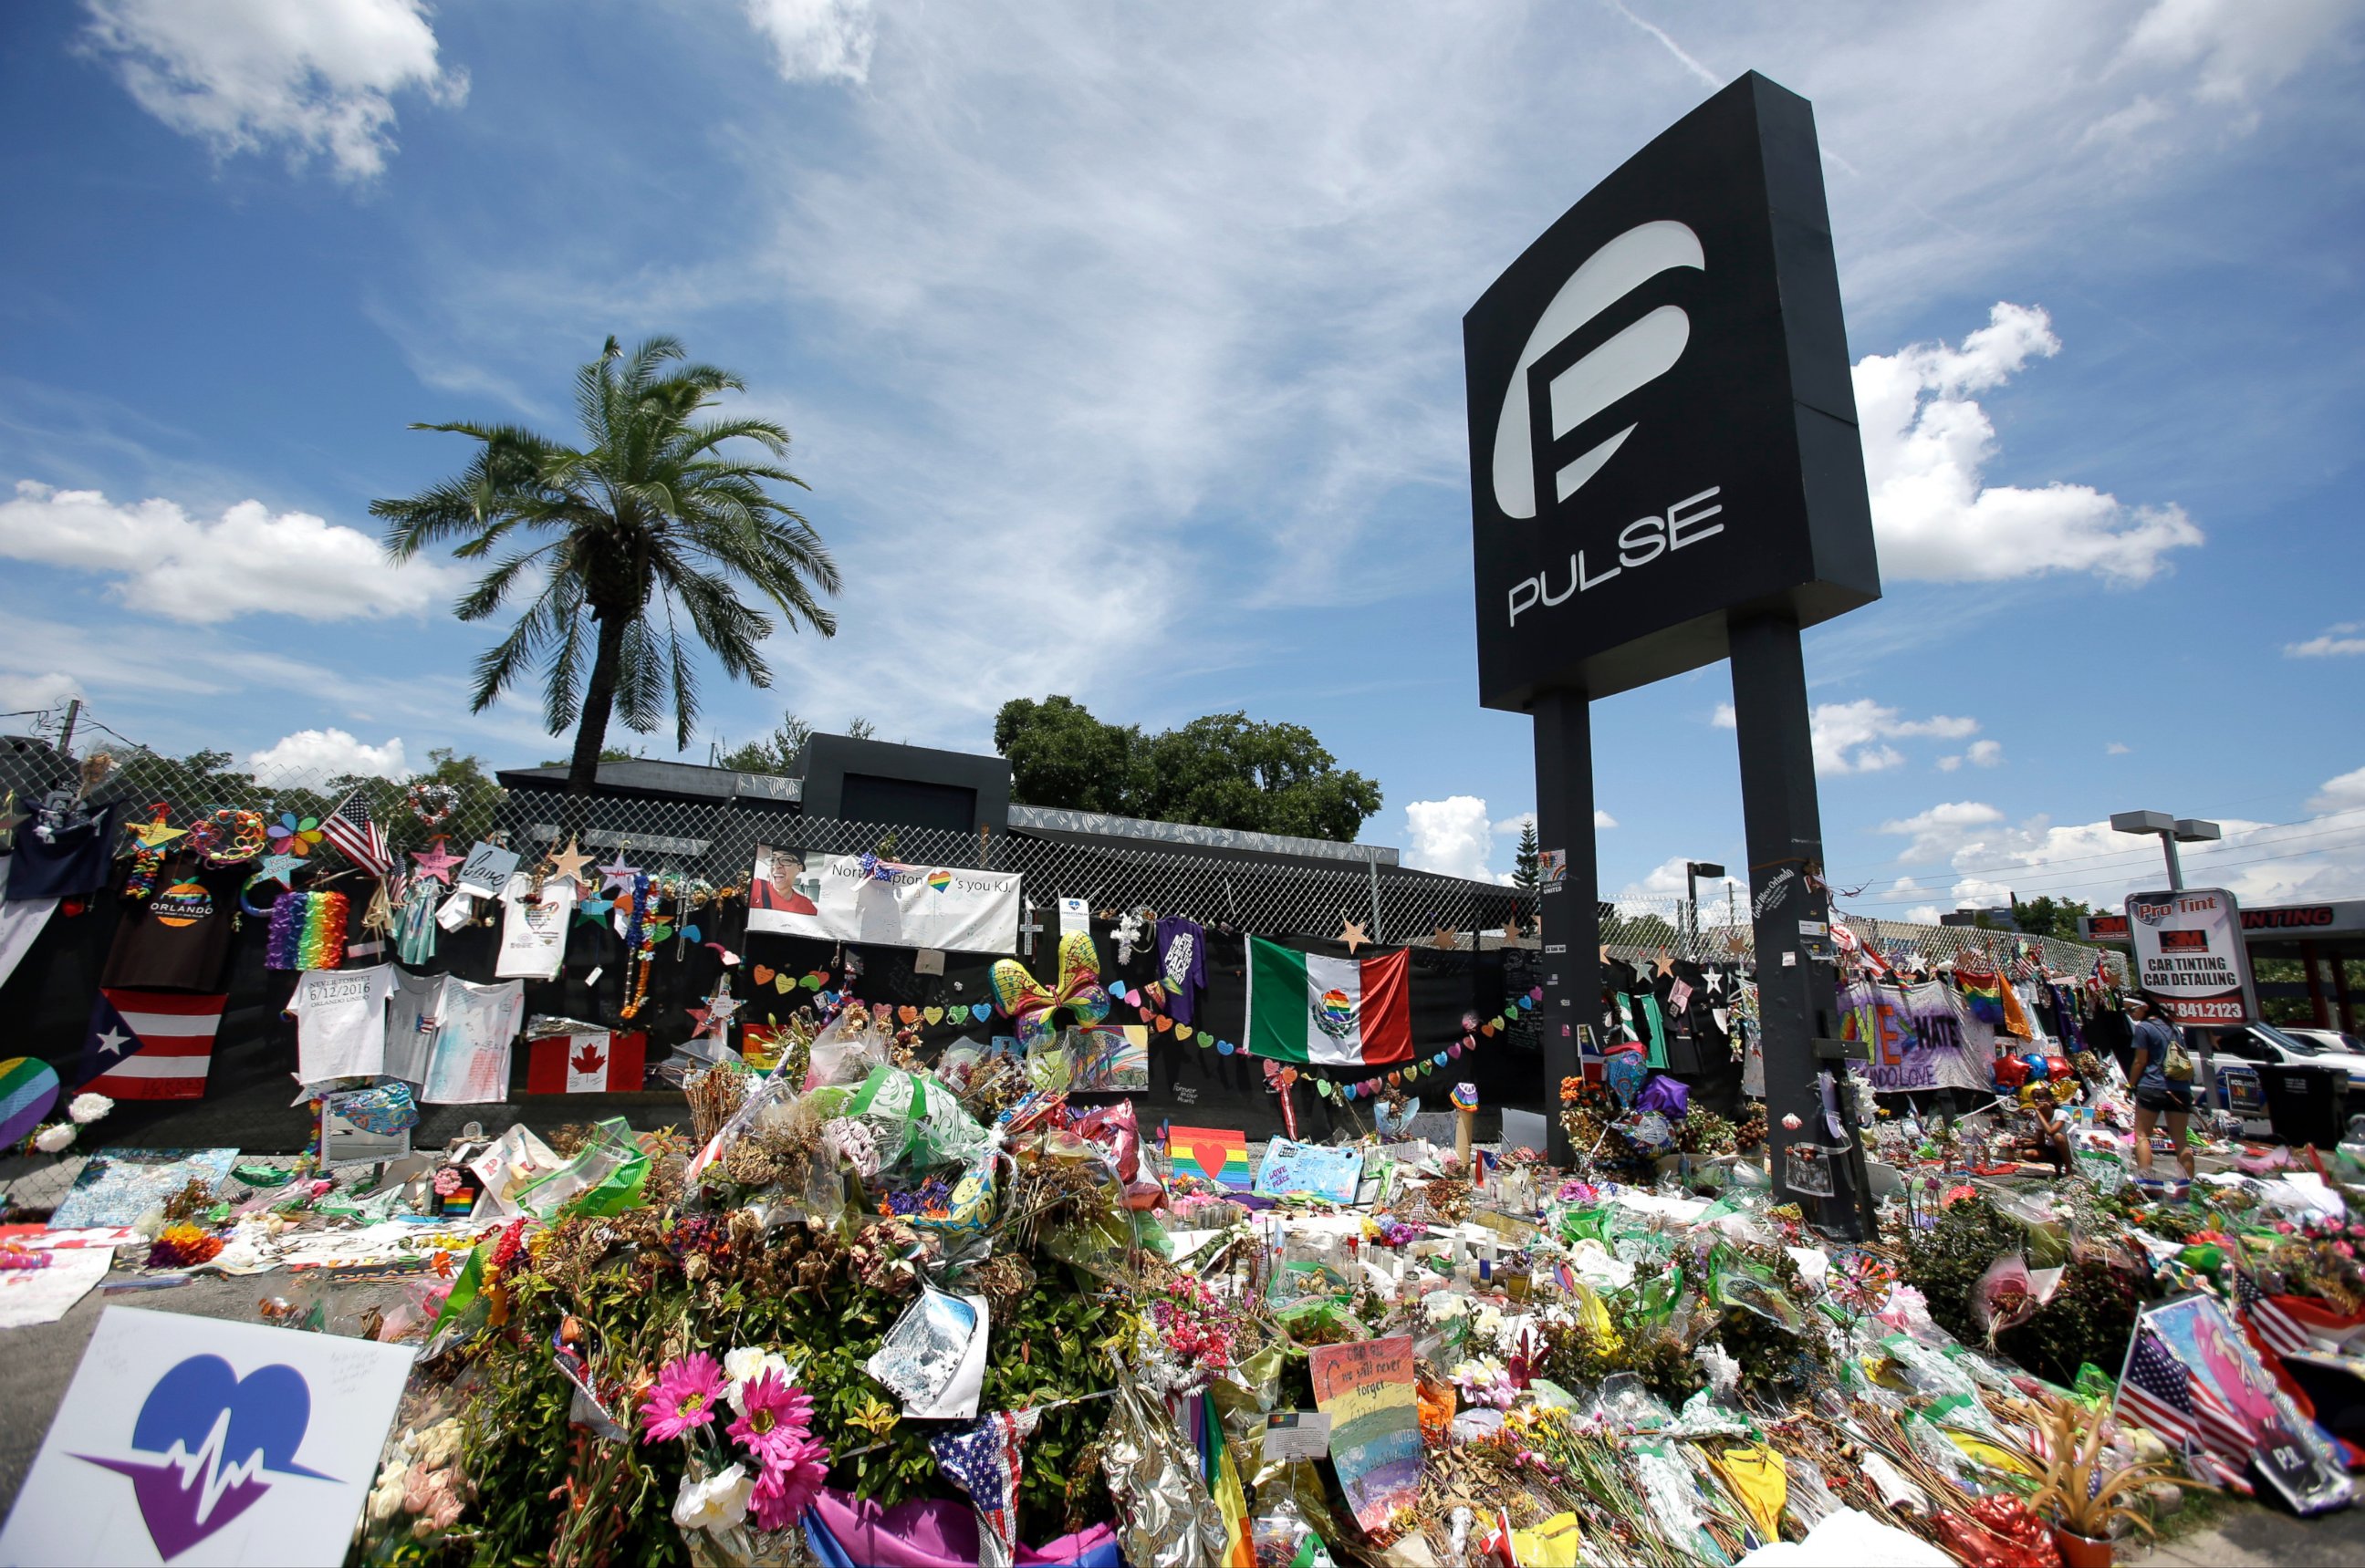 PHOTO: Photo taken shows a makeshift memorial outside the Pulse nightclub in Orlando, Fla., July 11, 2016.